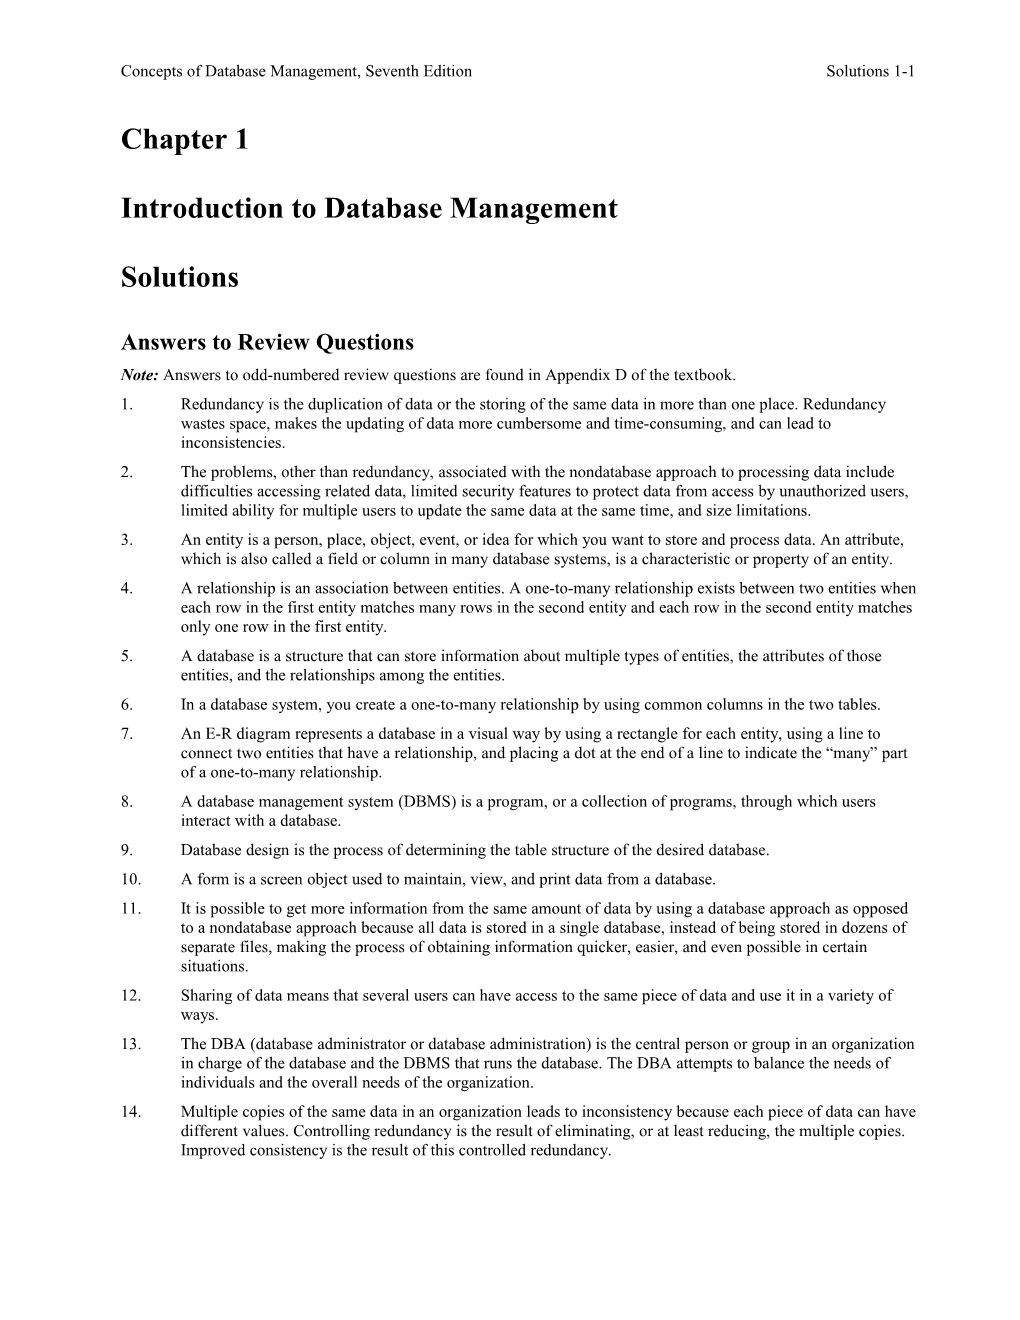 Concepts of Database Management, Seventh Editionsolutions 1-1